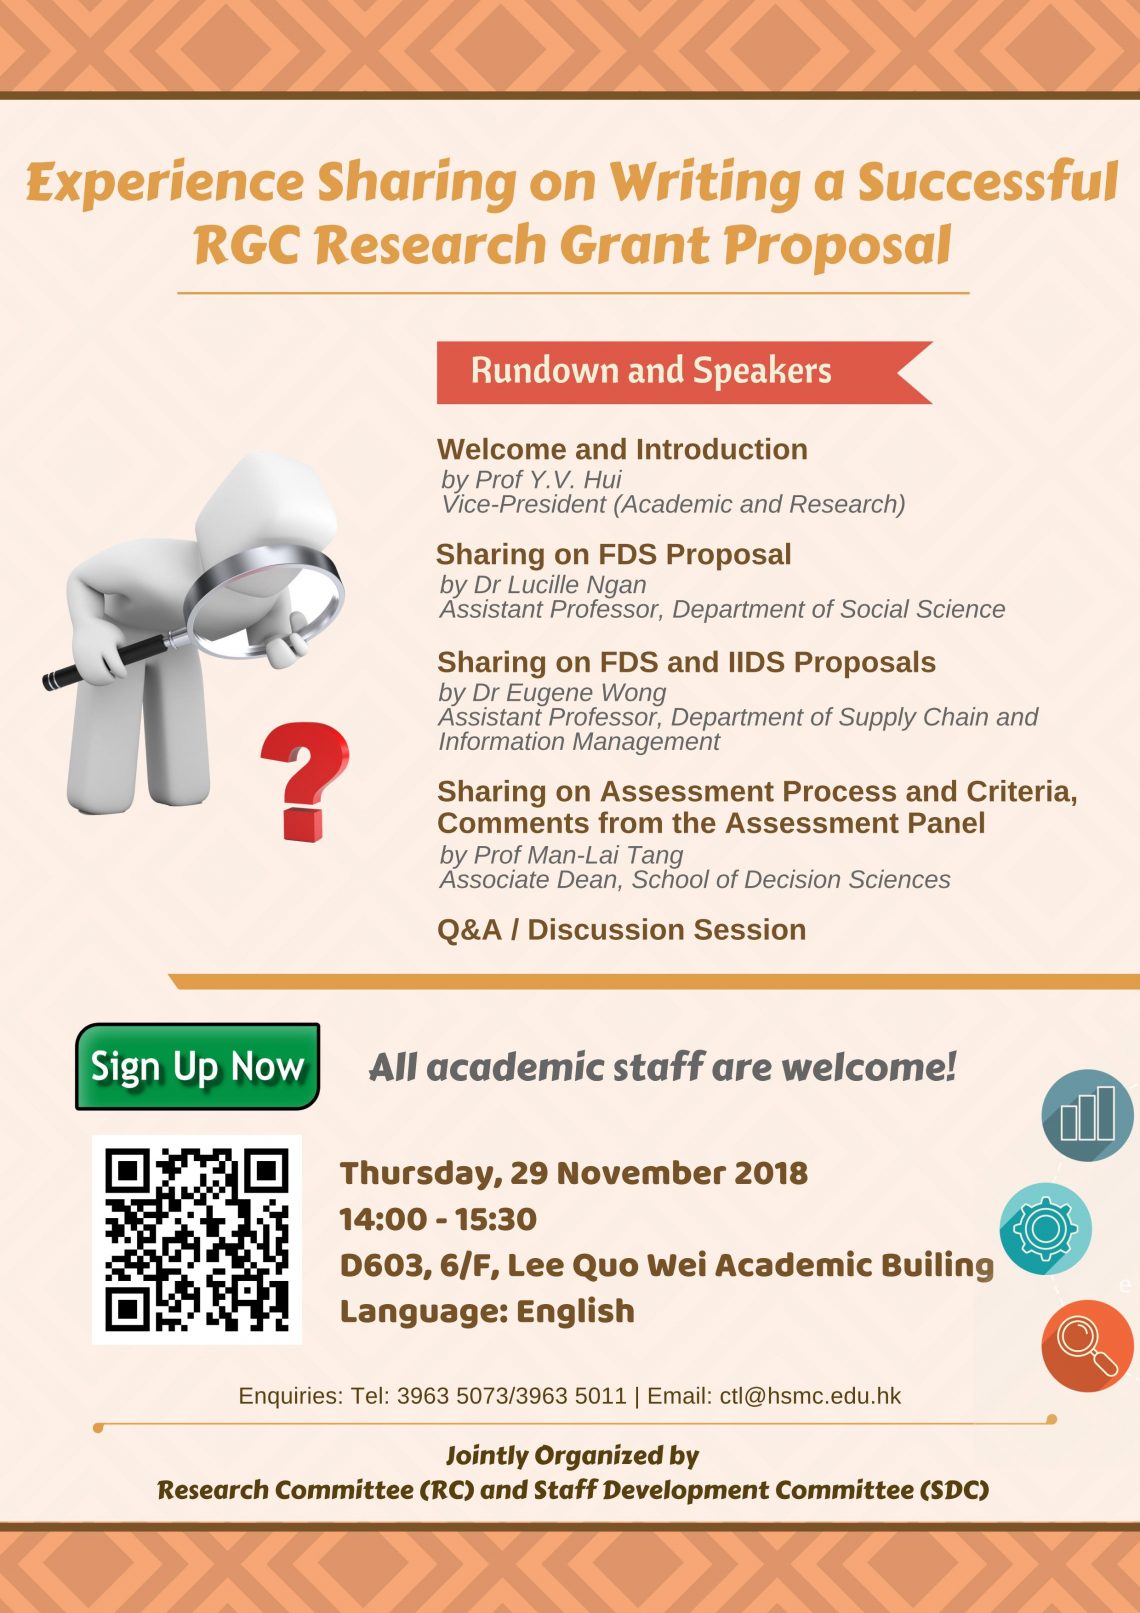 Experience Sharing on Writing a Successful RGC Research Grant Proposal